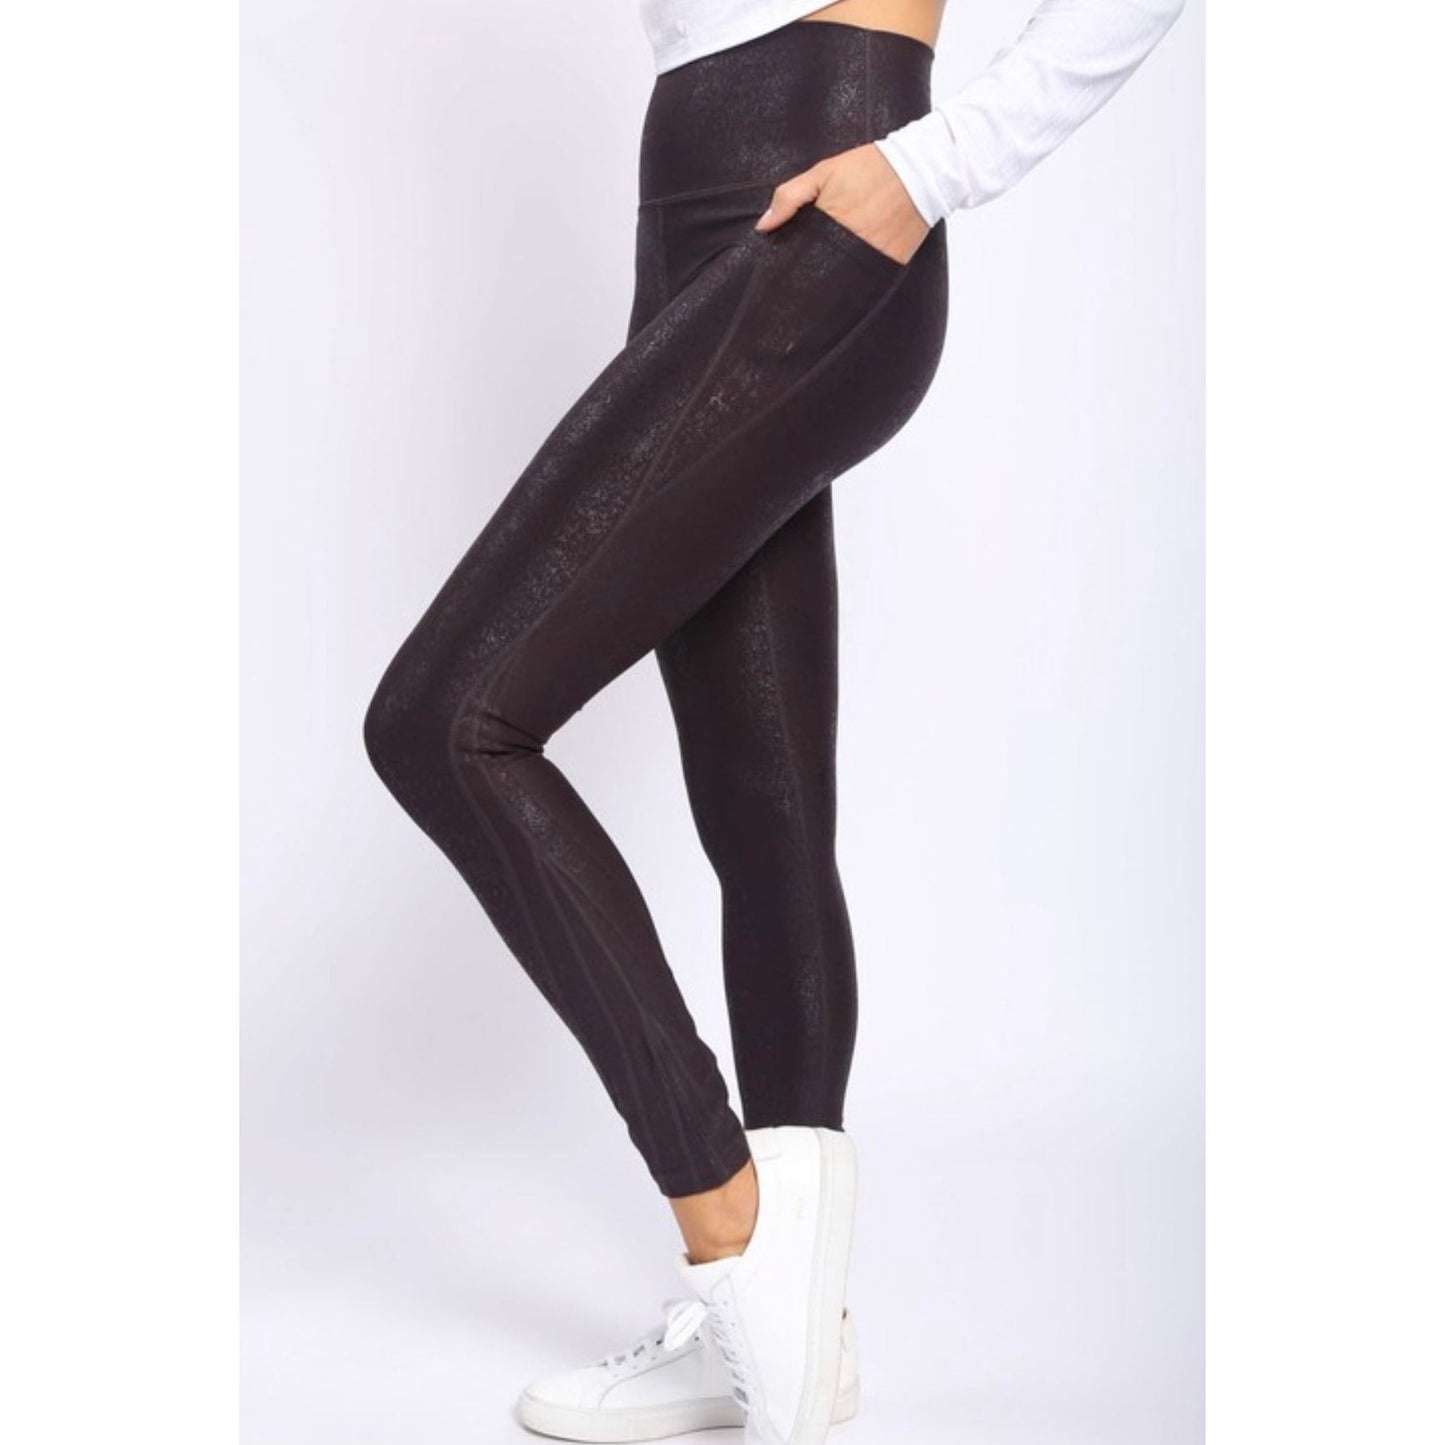 Lets Get Physical Leggings "Chocolate"